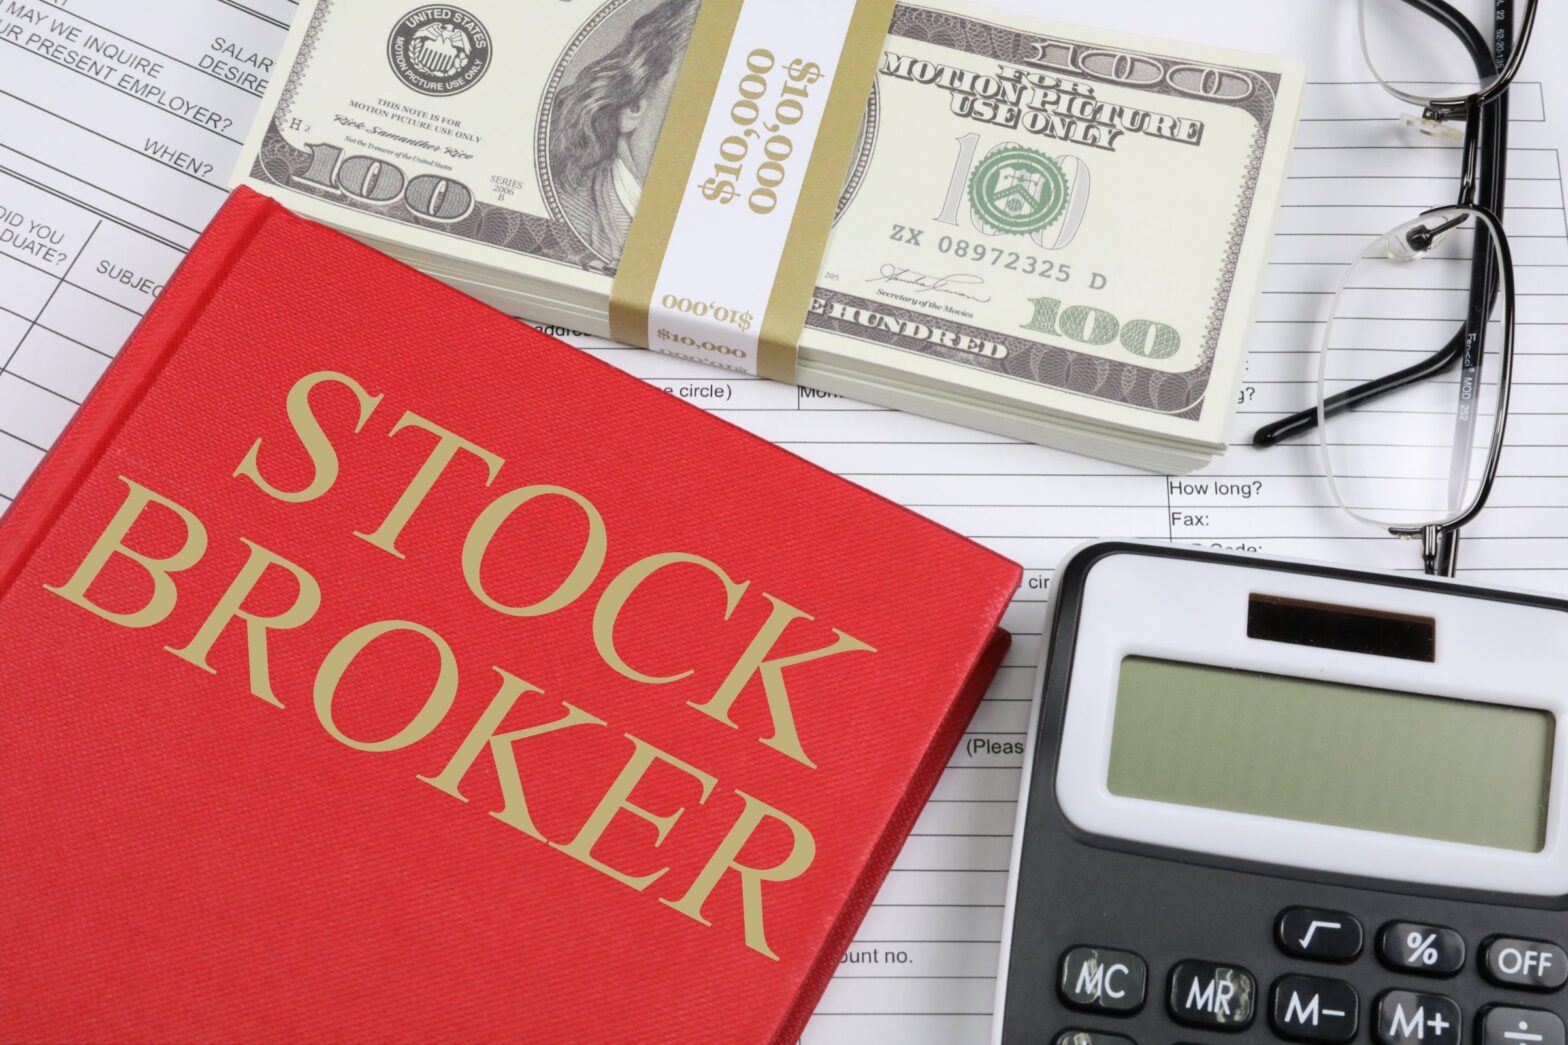  Modest Stock Broker – Why You Should Choose One